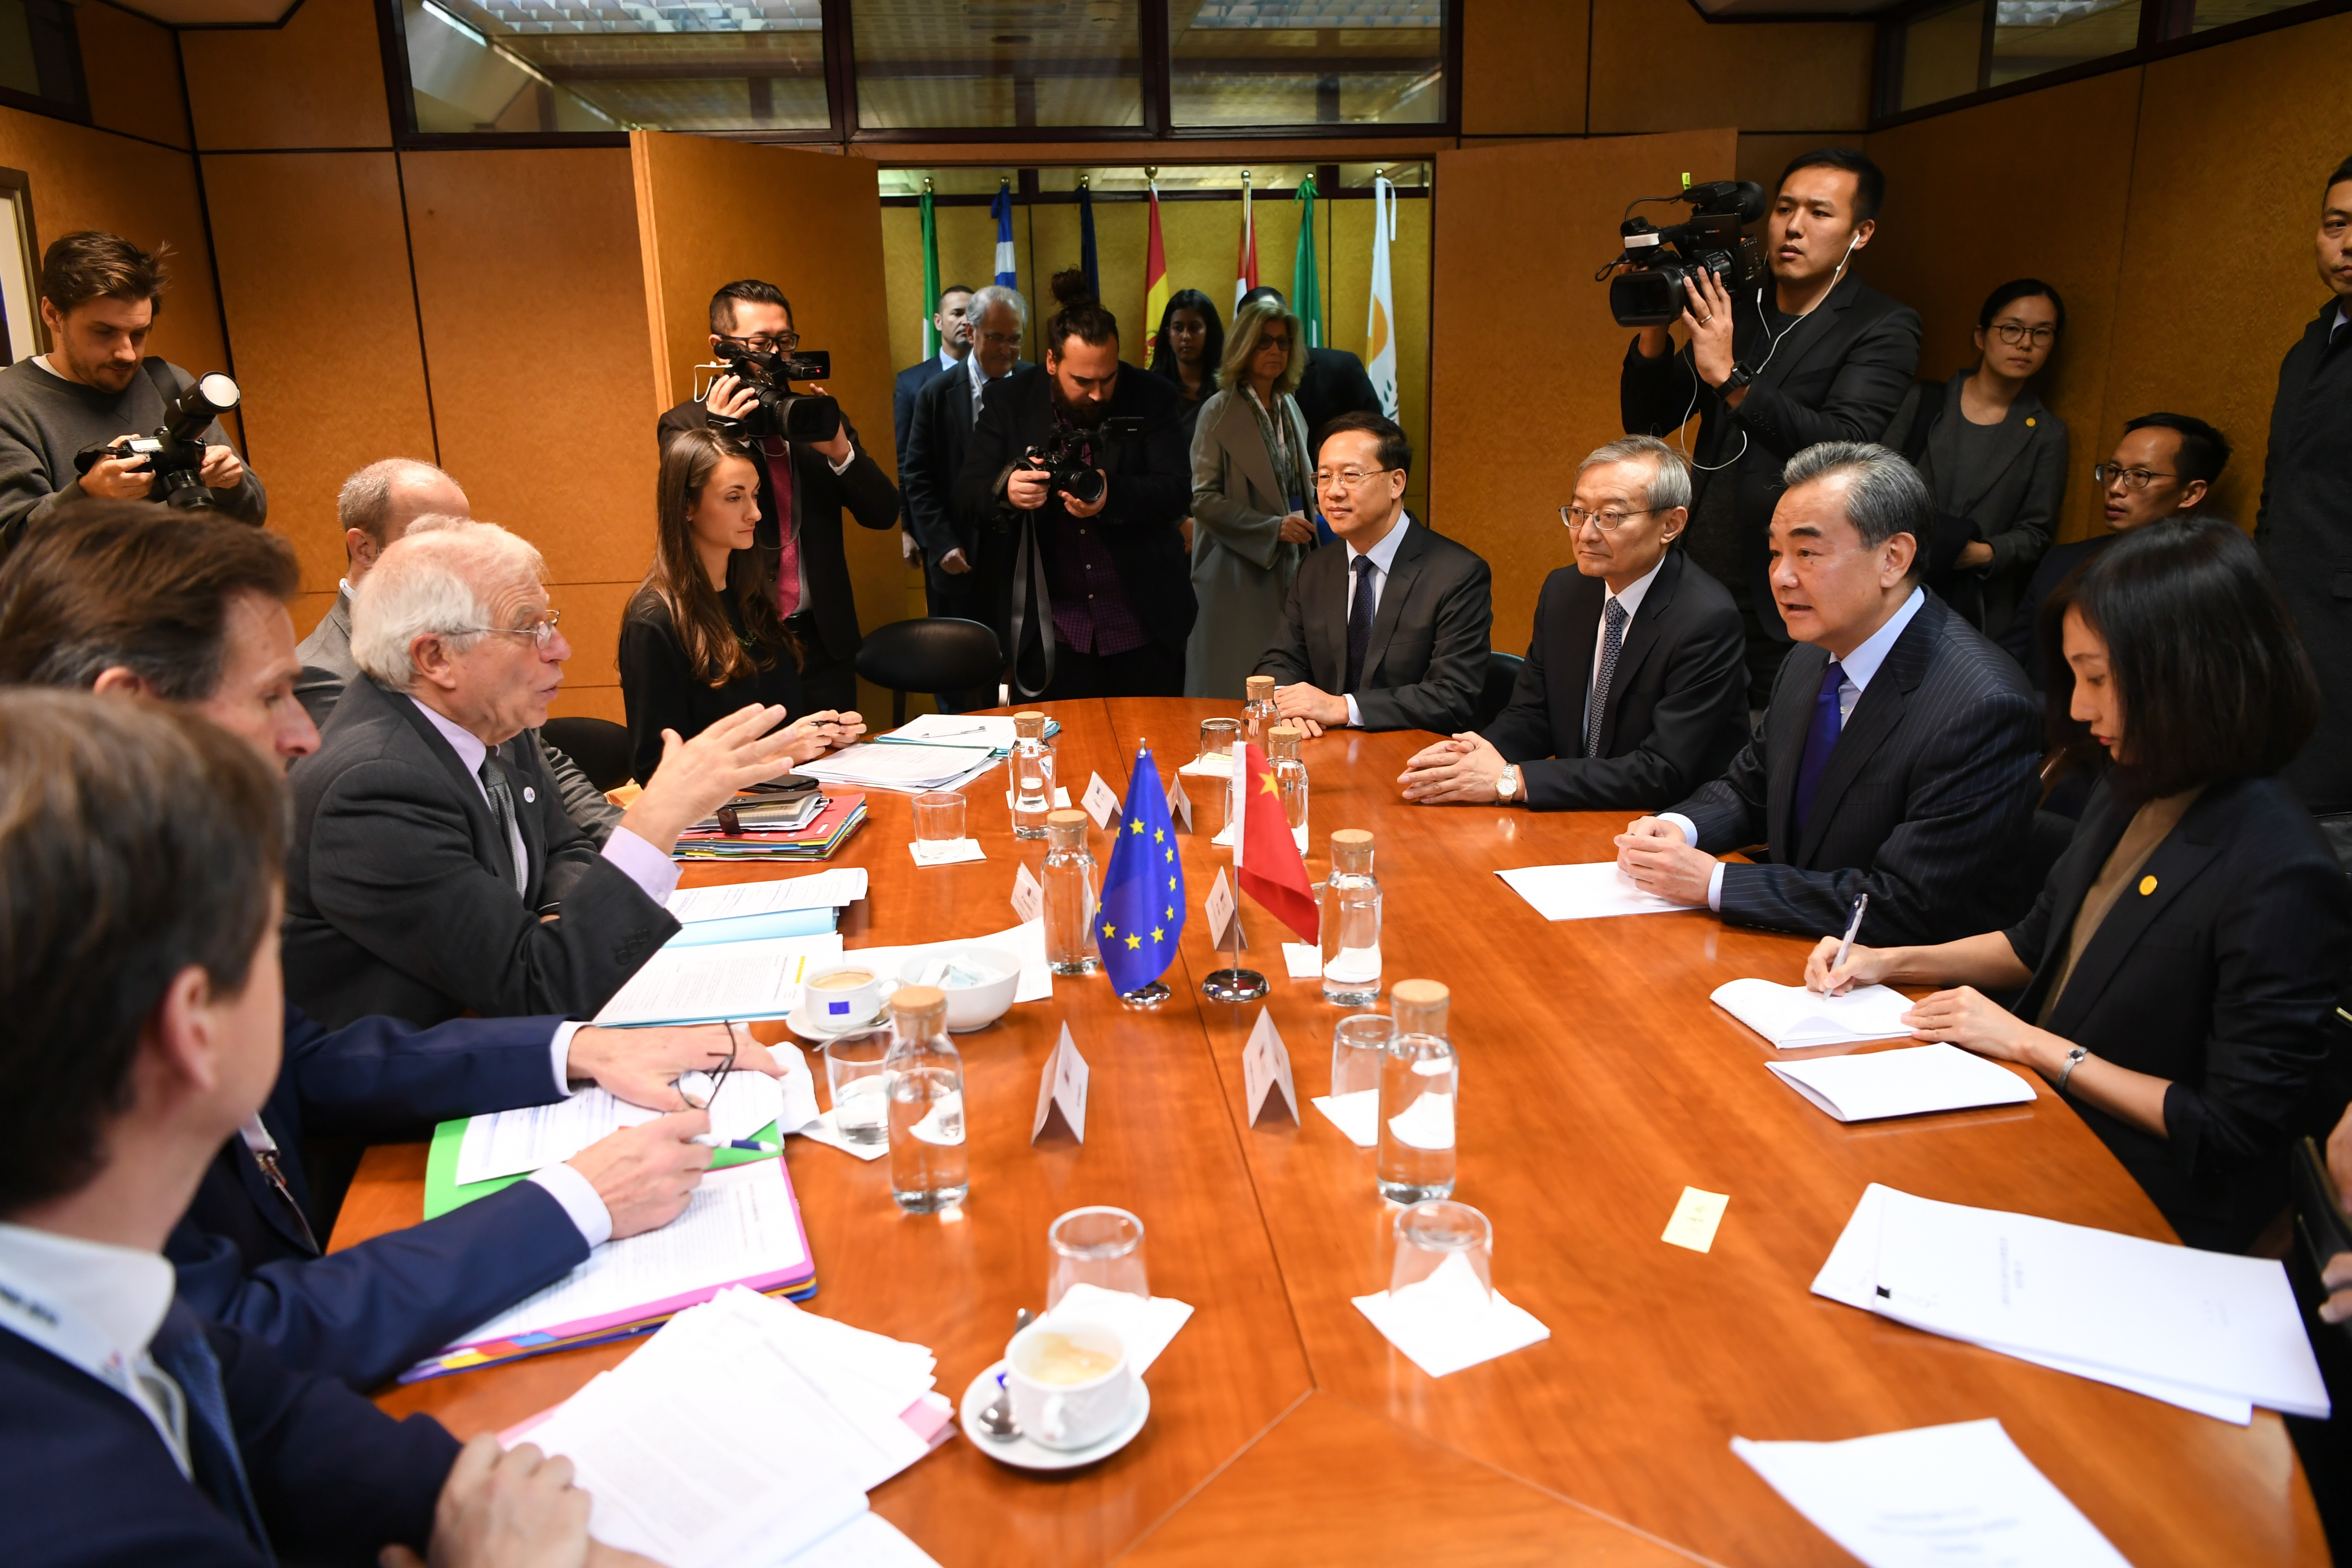 The EU foreign policy chief Josep Borrell (third from left) and his delegation meet with the Chinese delegation led by foreign minister Wang Yi (second from right) on the sidelines of the Asem foreign ministers’ meeting in Madrid, Spain, on December 15. Photo: Xinhua